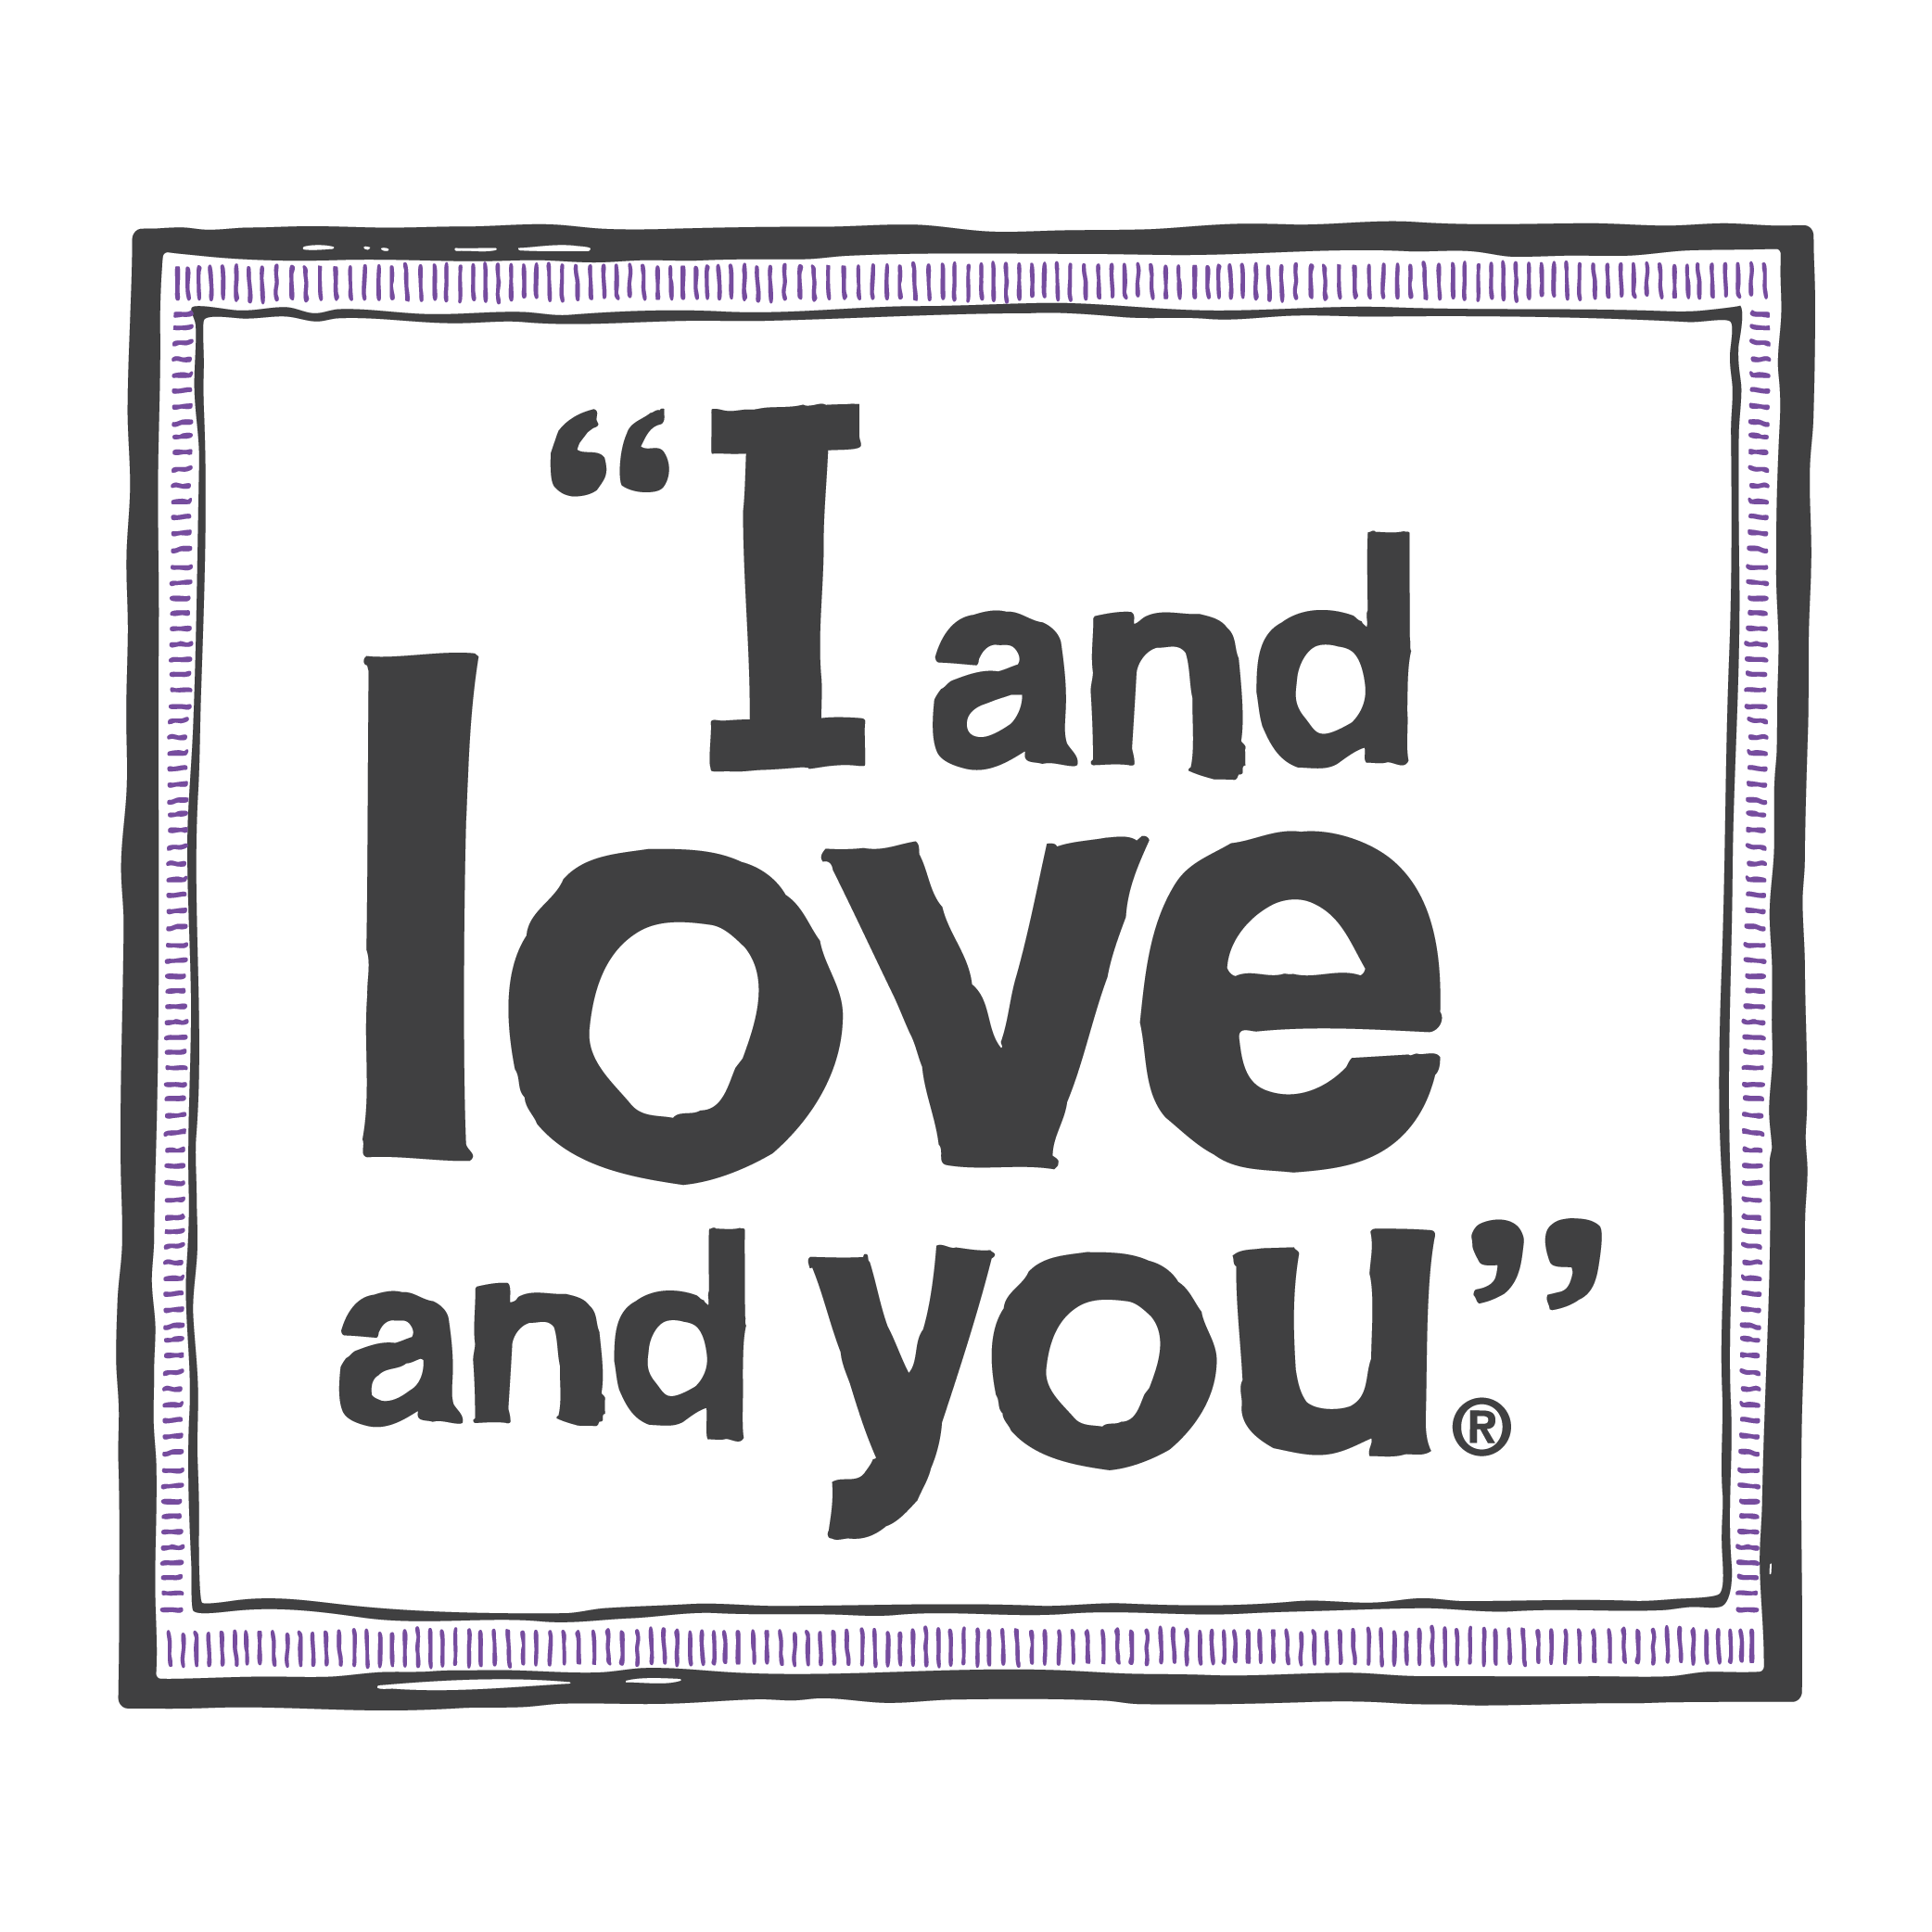 Exclusive Dog Food Partner, "I and love and you"